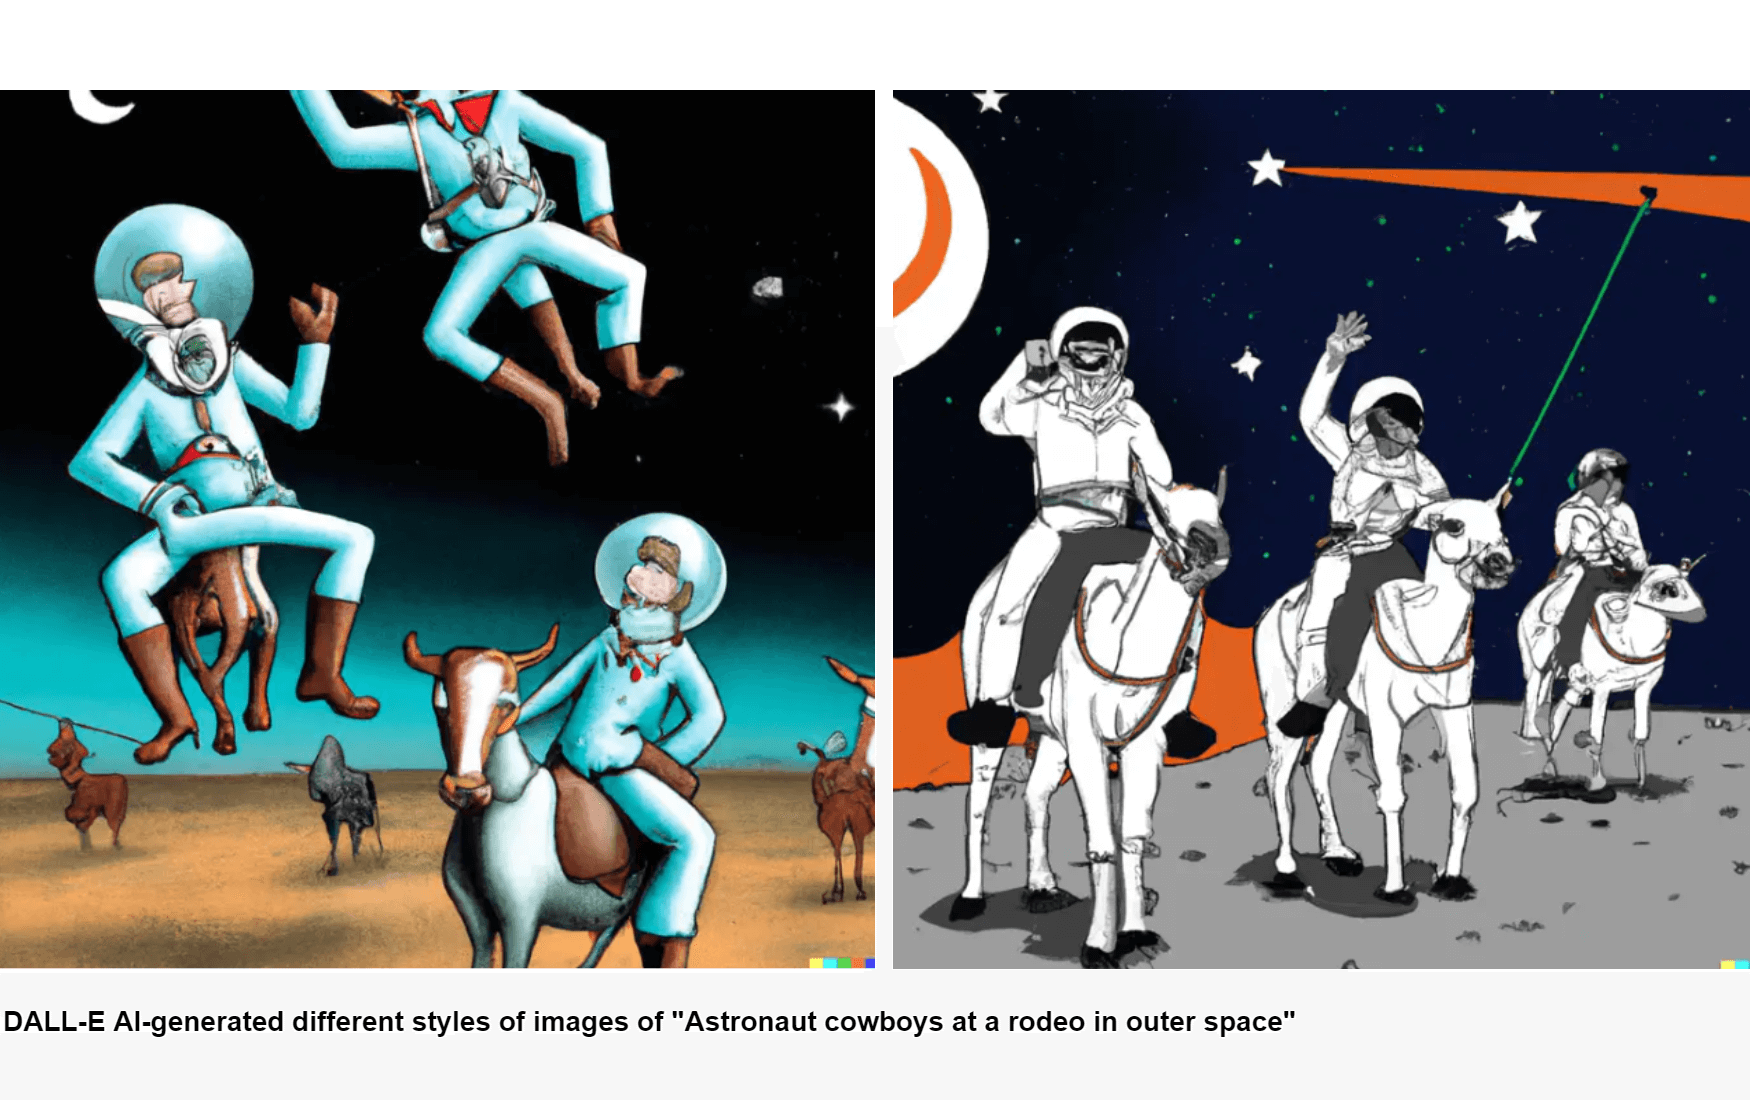 dall-e ai-generated different styles of images of astronaut cowboys at a rodeo in outer space